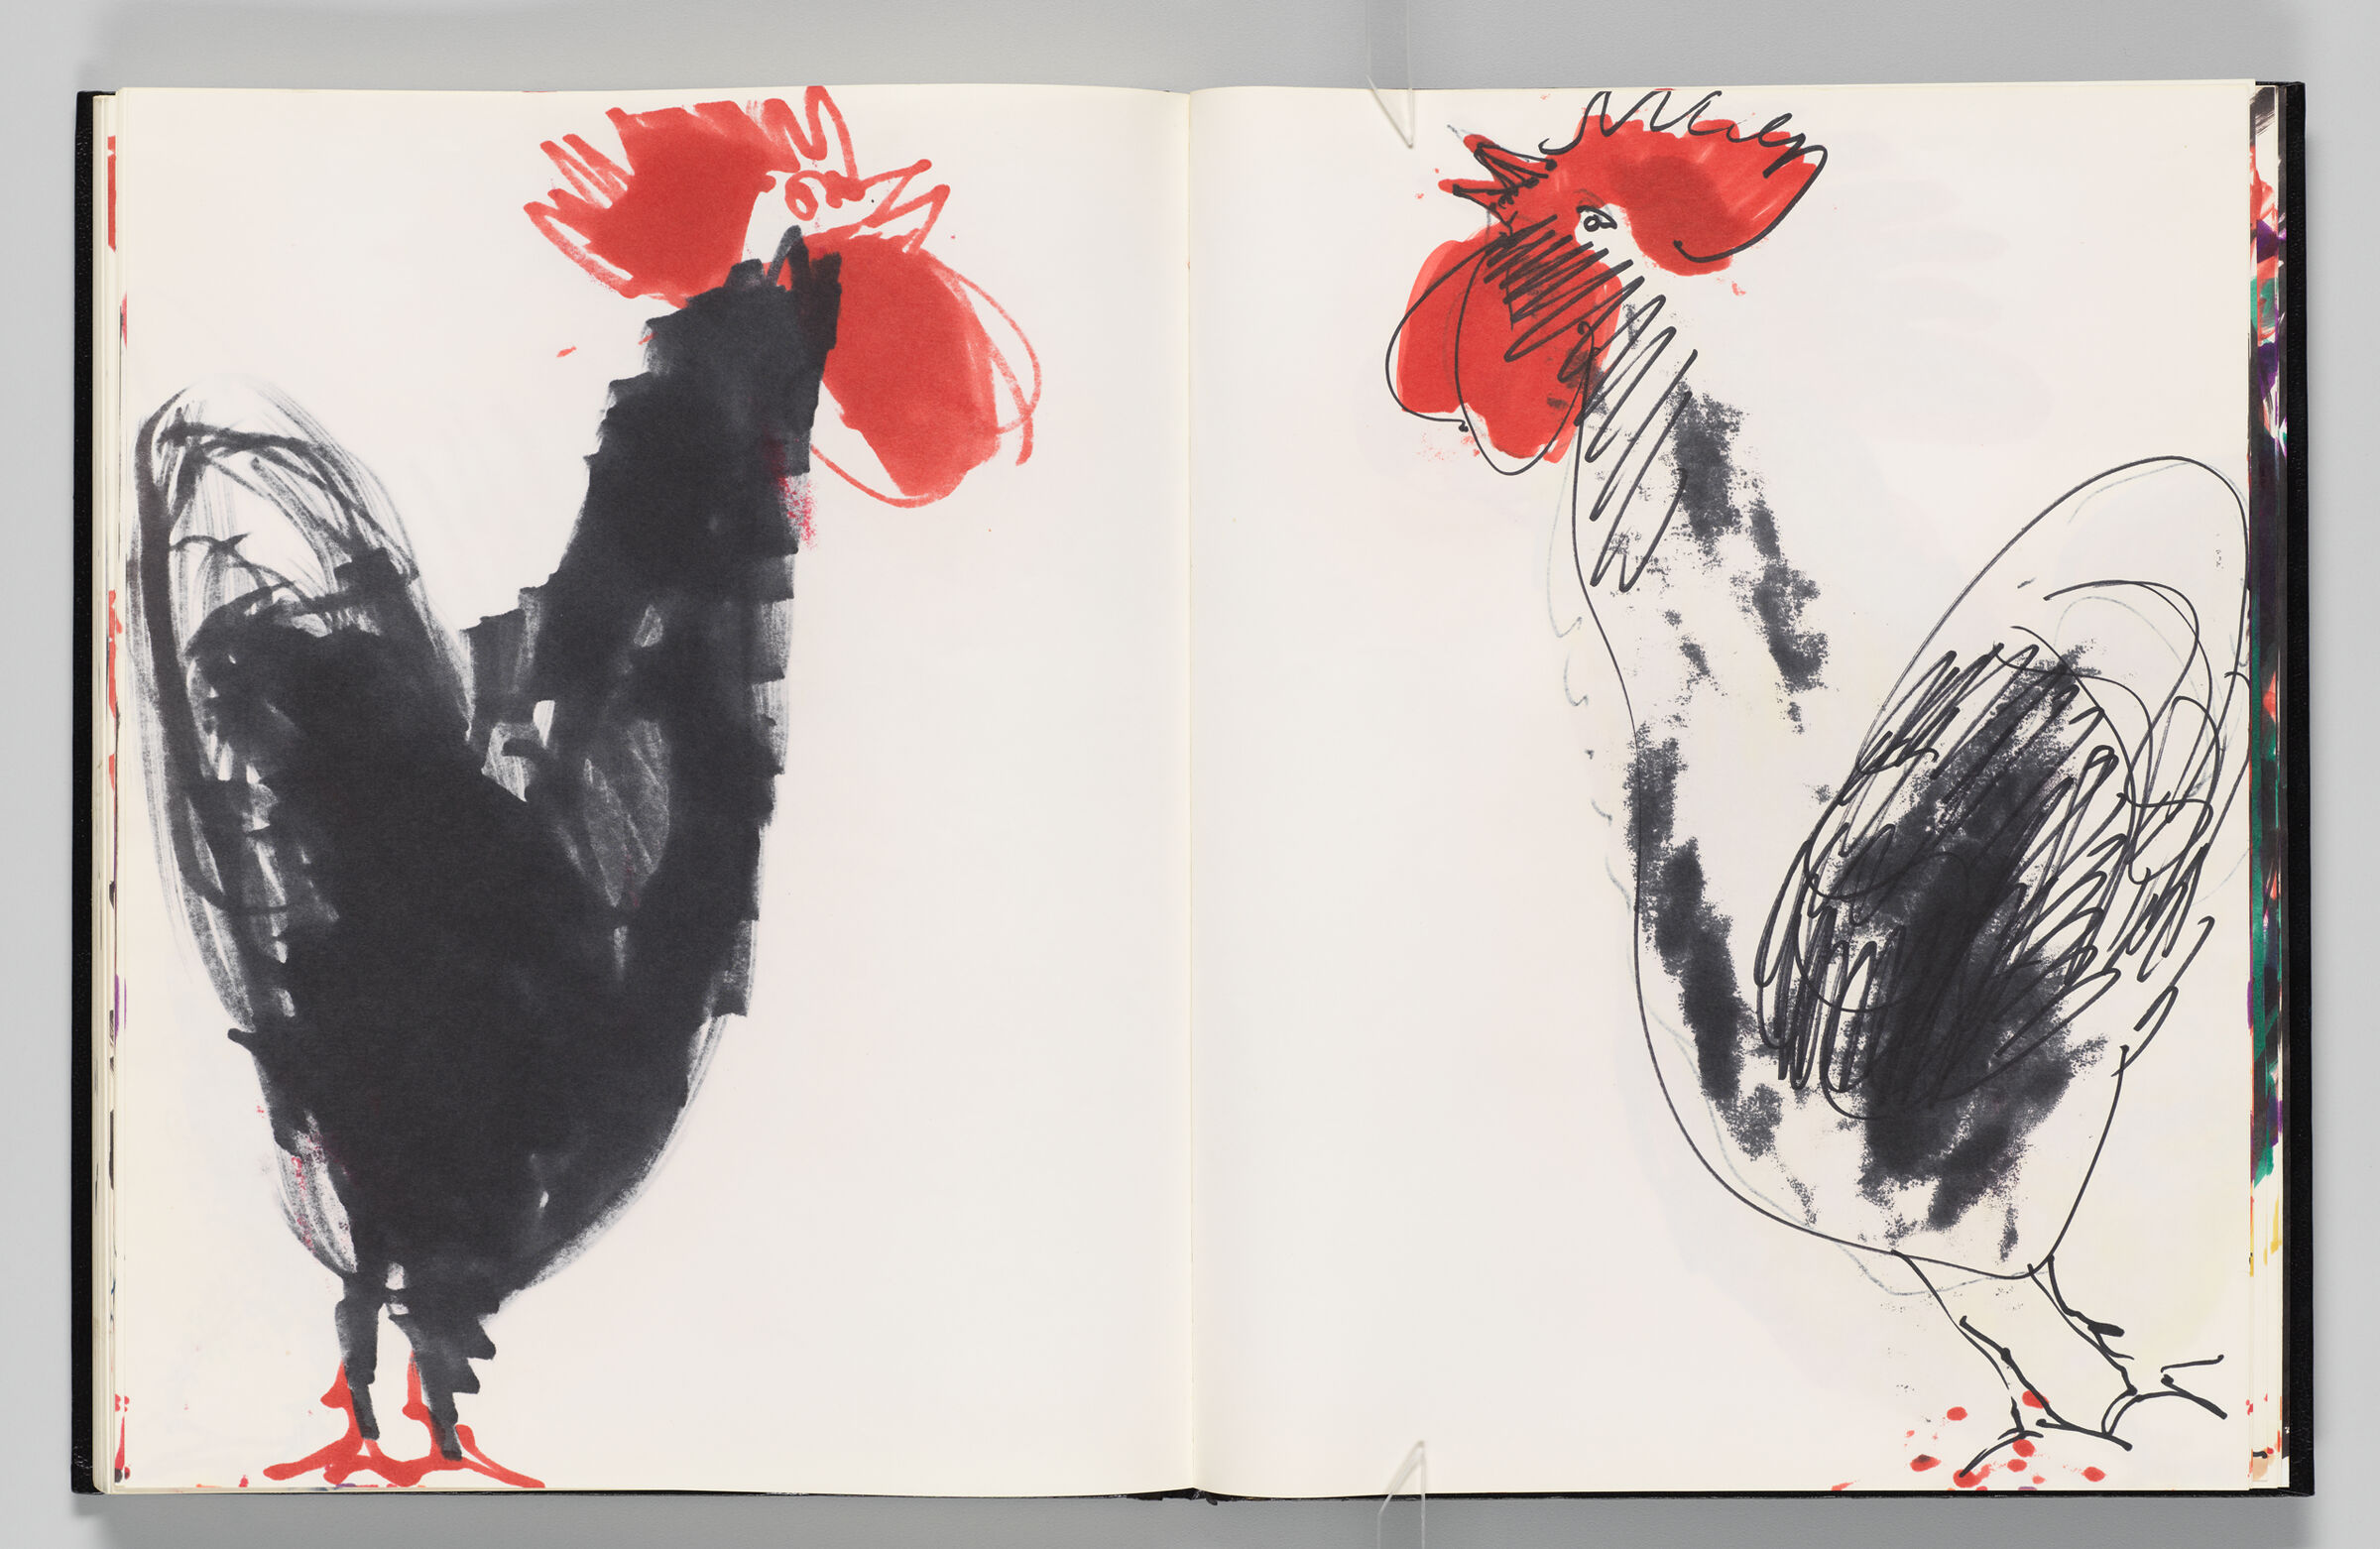 Untitled (Bleed-Through Of Previous Page, Left Page); Untitled (Rooster With Color Transfer, Right Page)